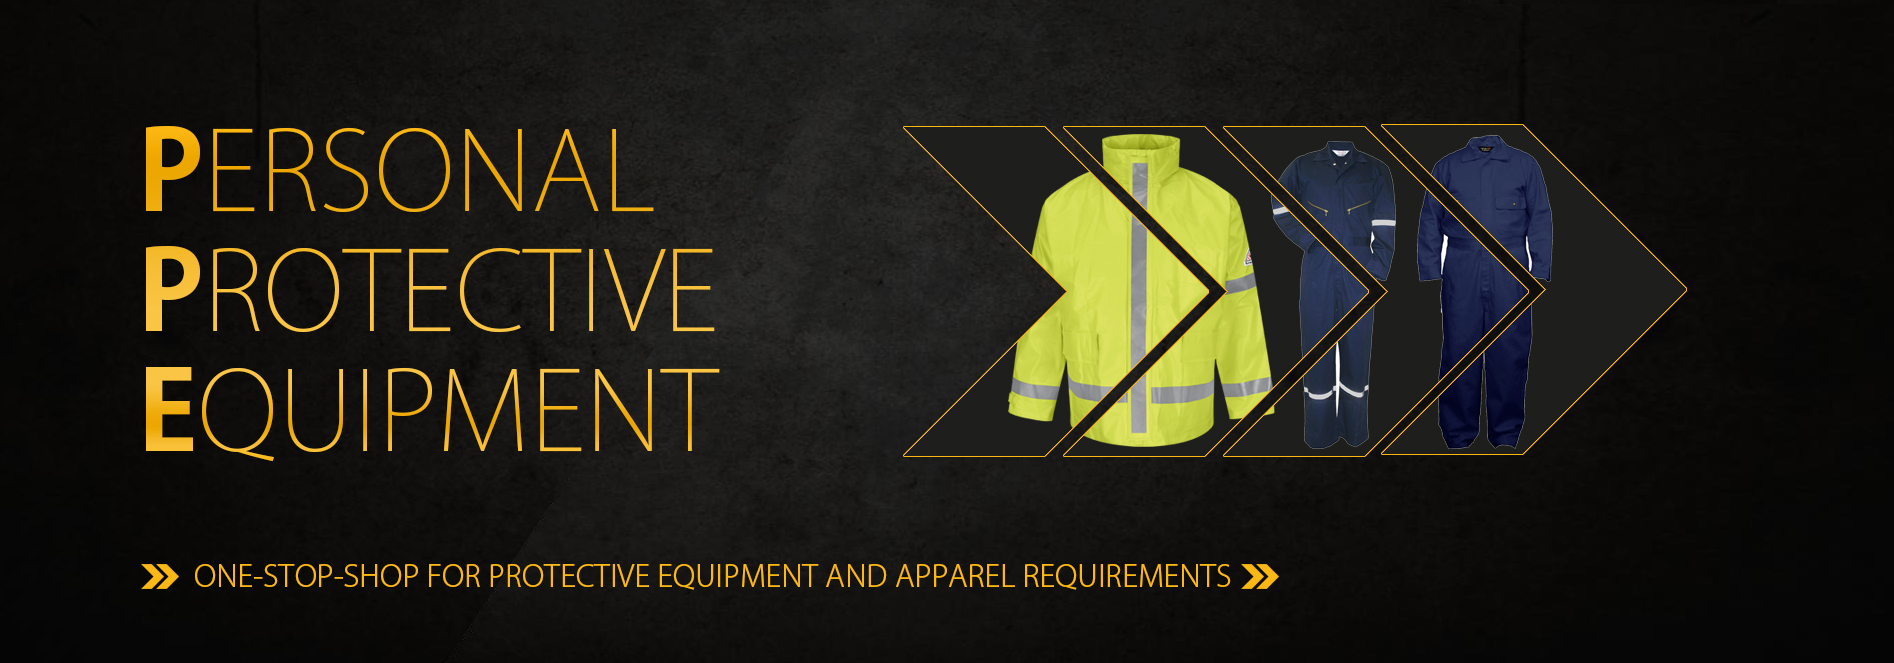 SAFETY PRODUCTS | PPE SUPPLIERS | PPE PRODUCTS | SAFETY EQUIPMENTS 